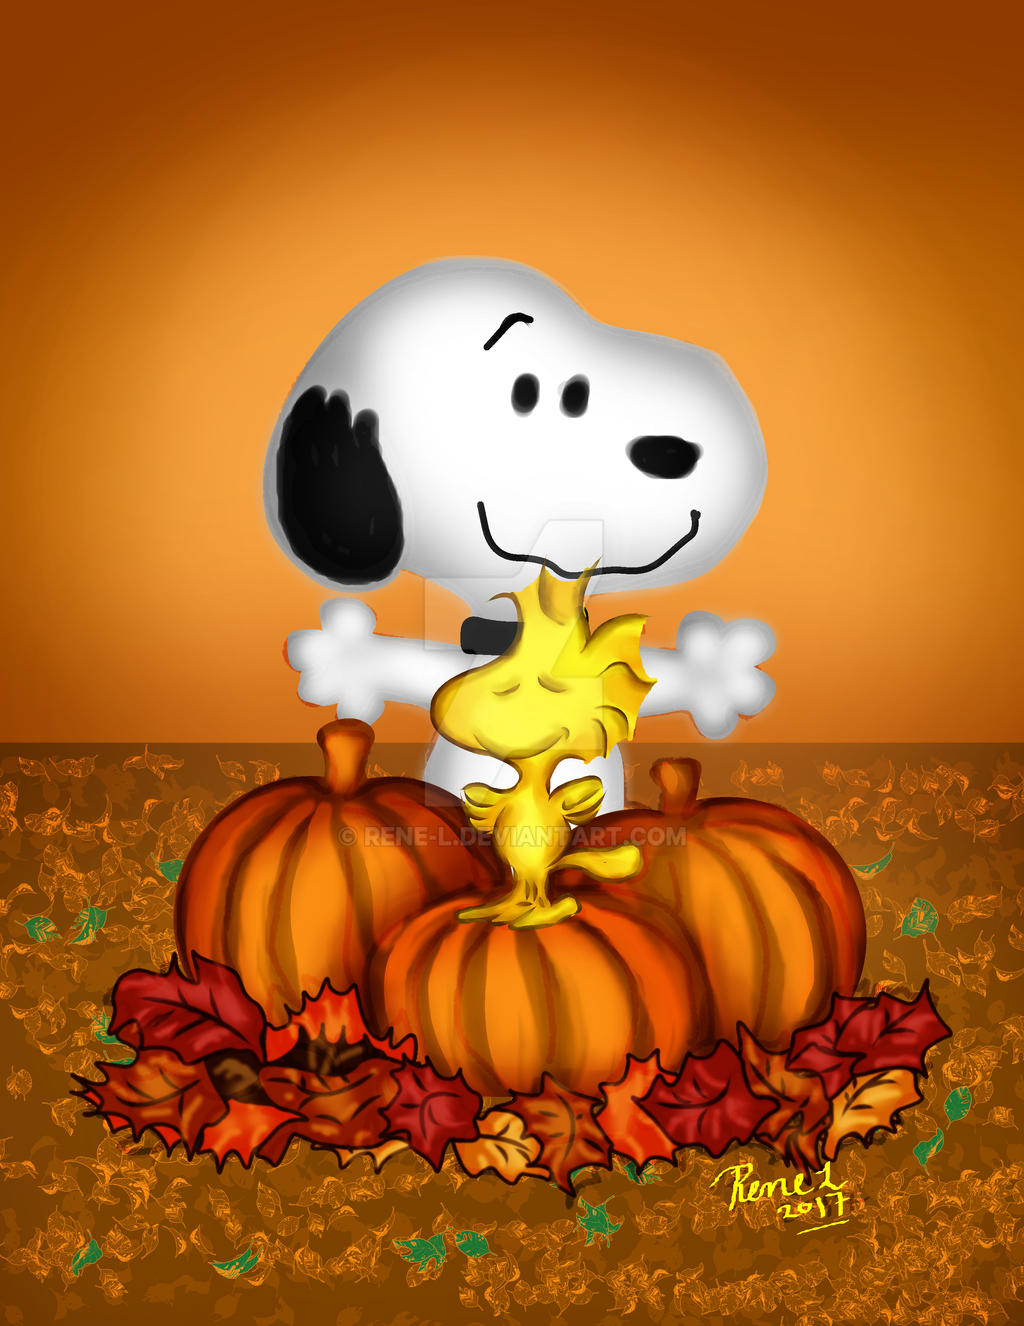 Snoopy and woodstock love fall by rene